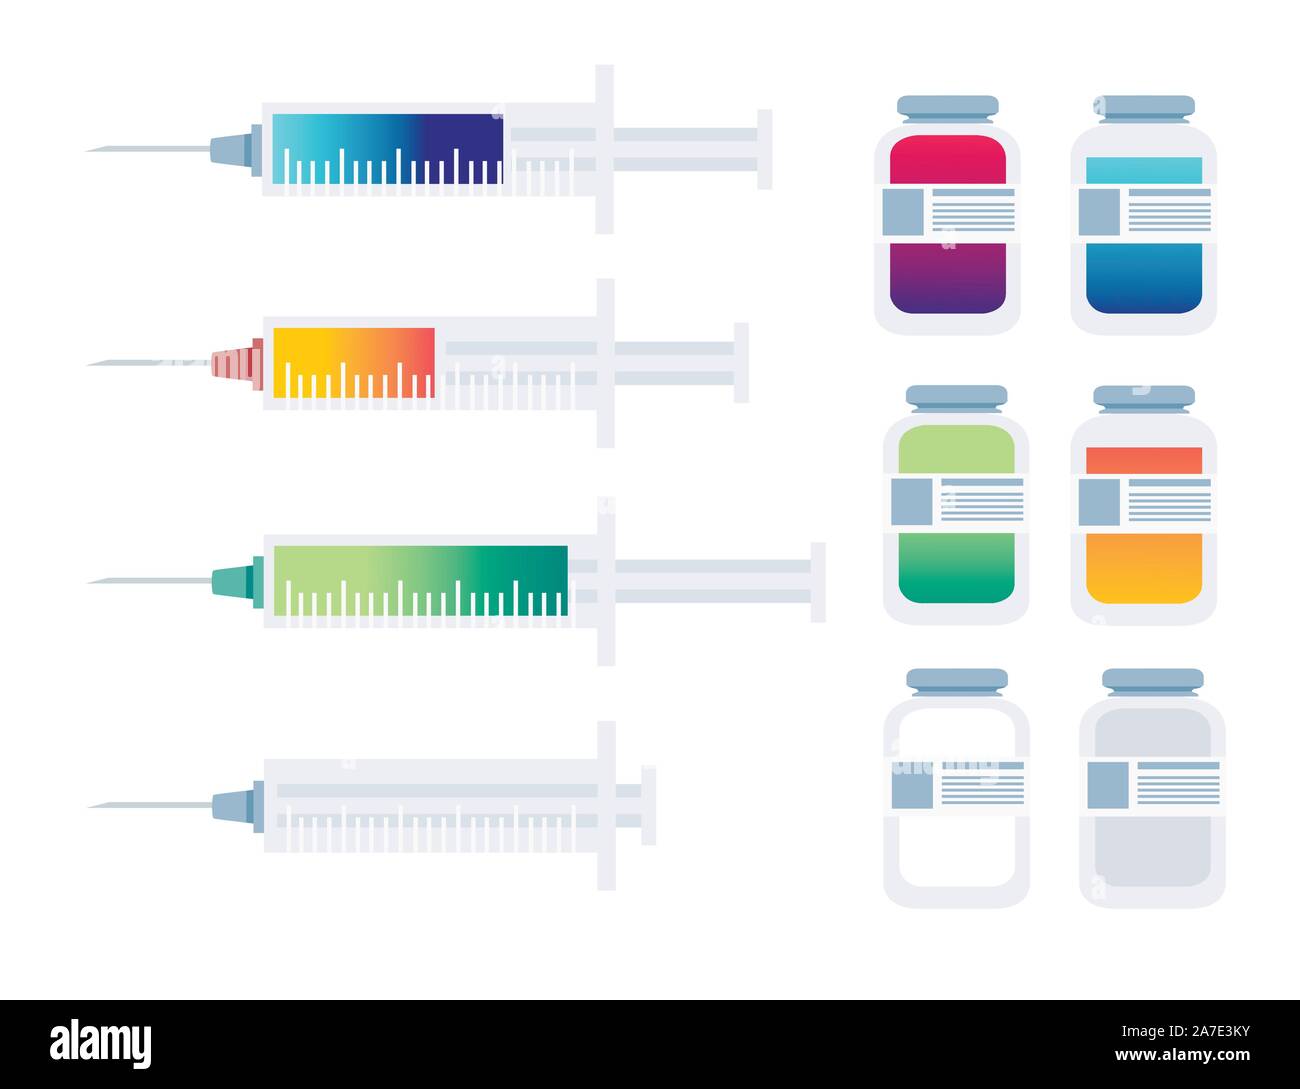 Hyaluronic acid injection medical syringe and containers skin care and medical intervention flat vector illustration on white background. Stock Vector